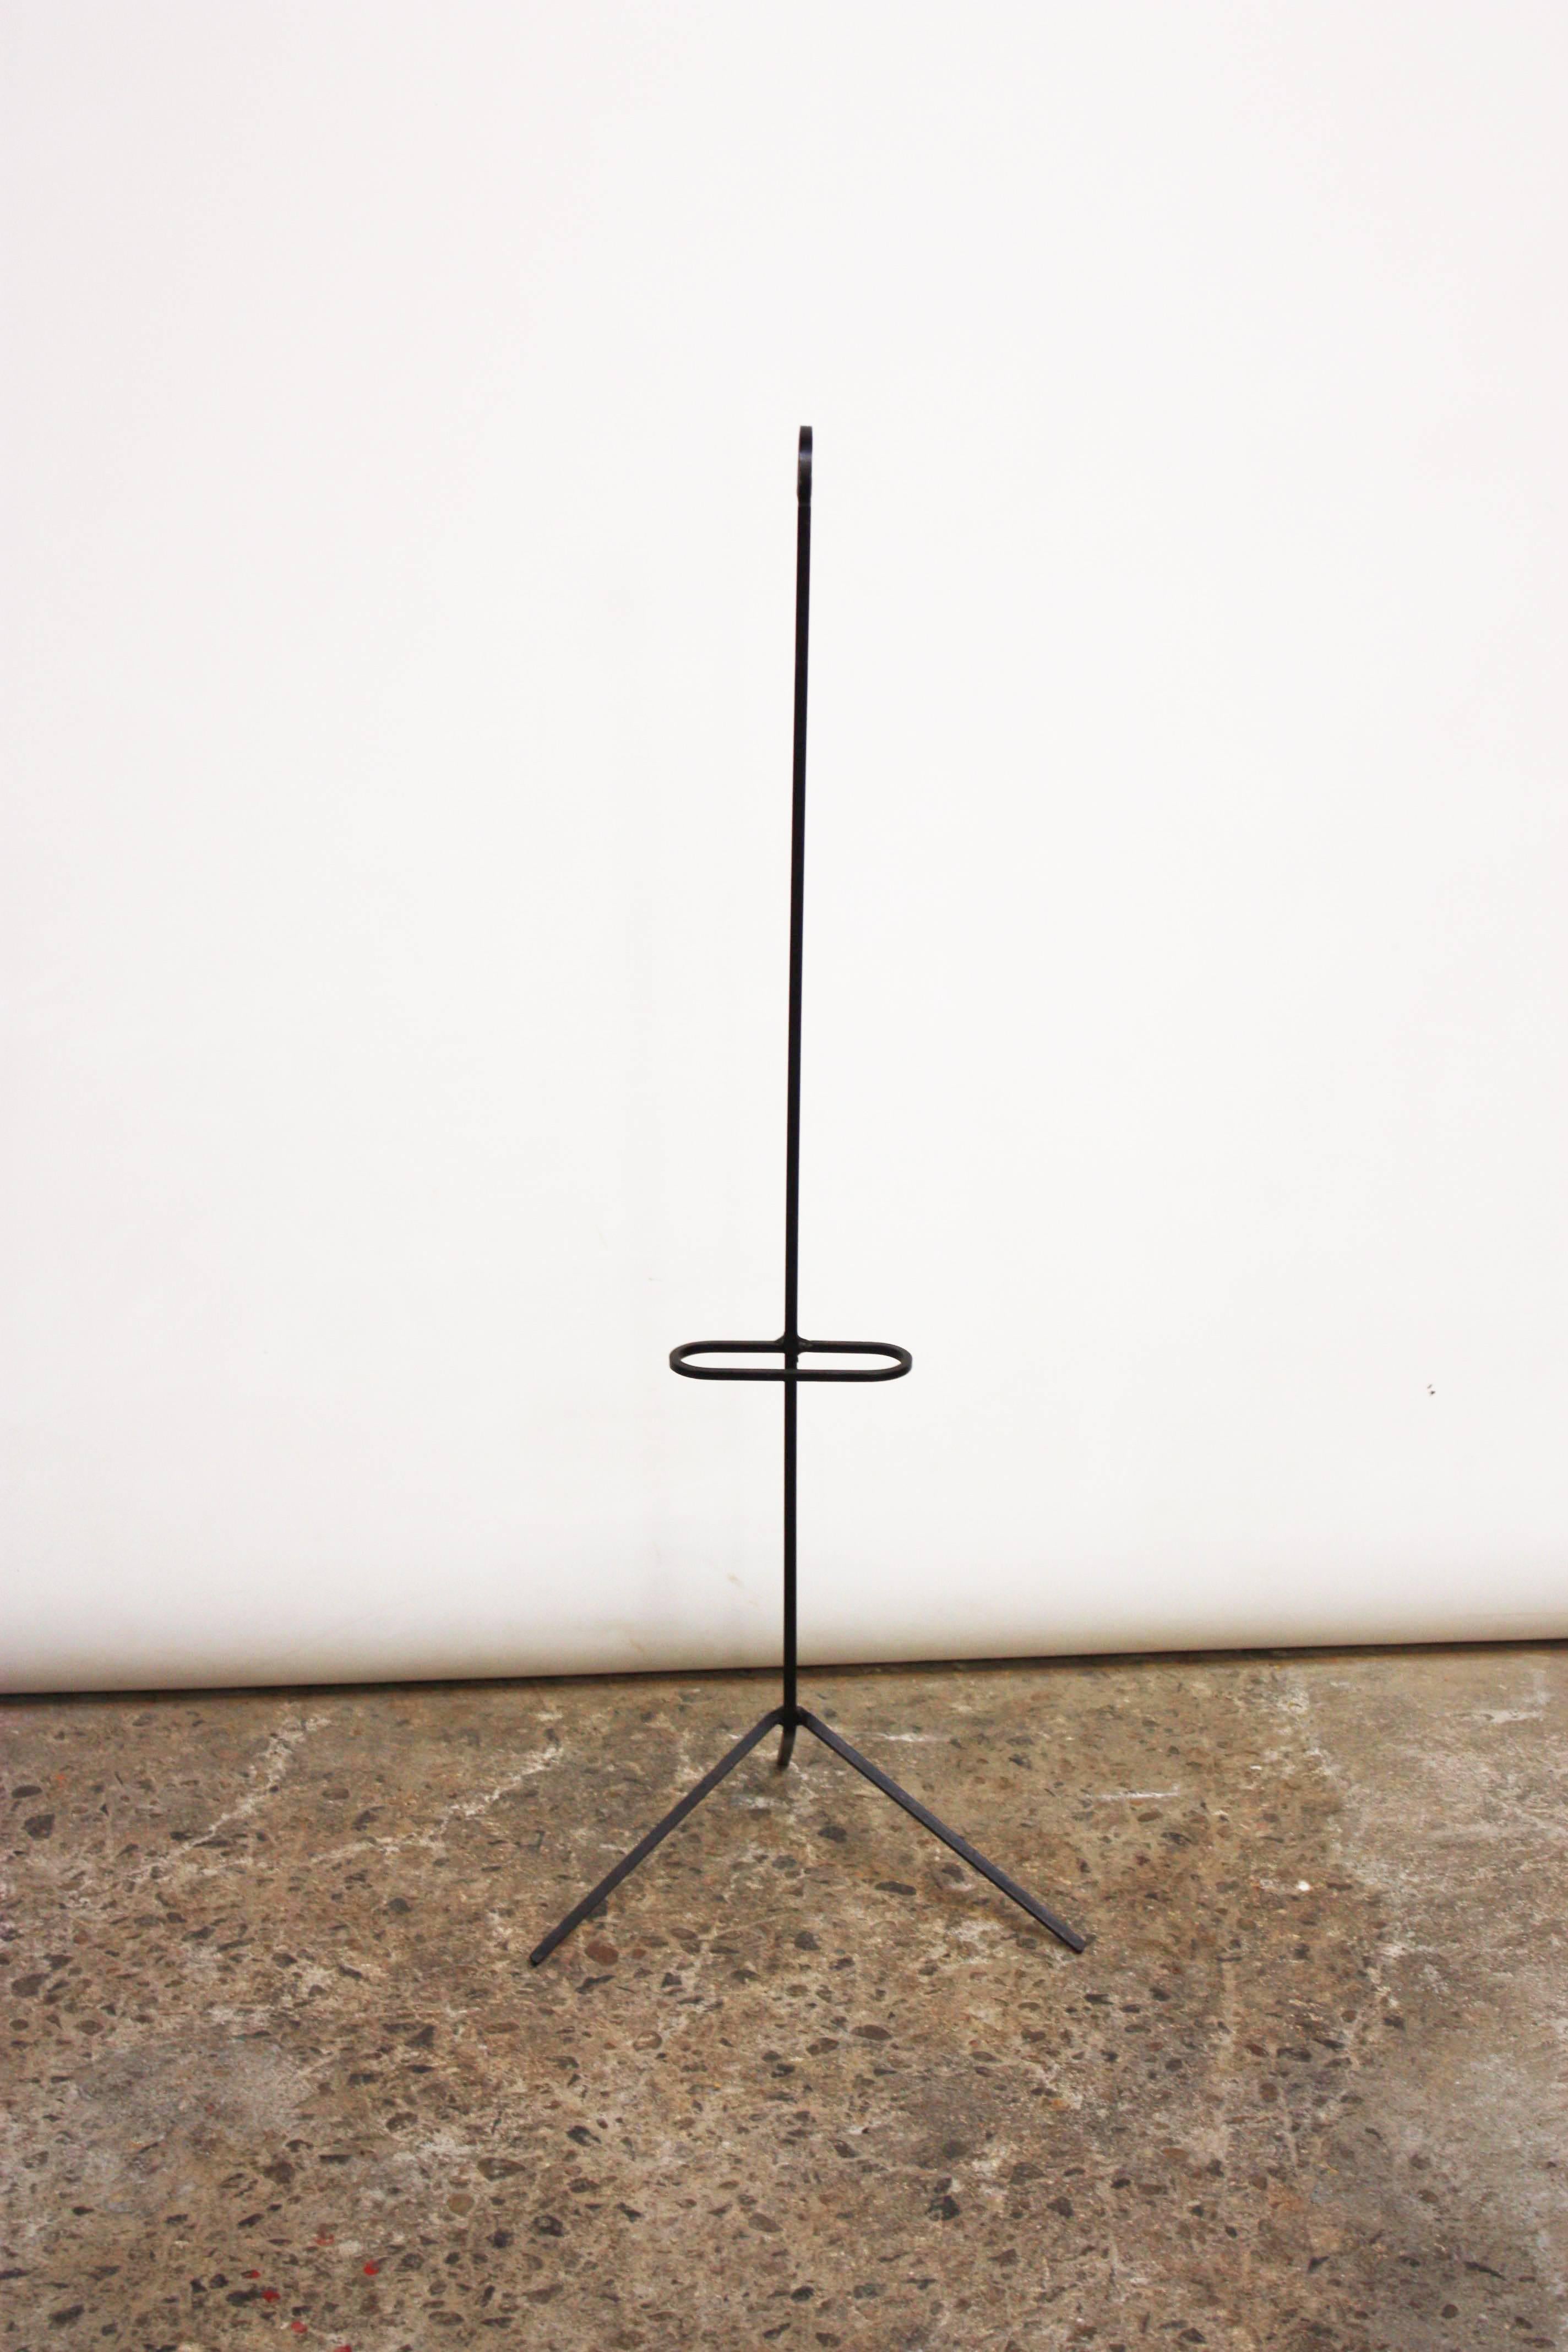 This unusual wrought iron valet is elegant in its simplicity. The frame is a continuous piece of wrought iron, and the hanger is removable. This is a minimal but stylish take on a standard valet stand.
Length of the base is 14.25